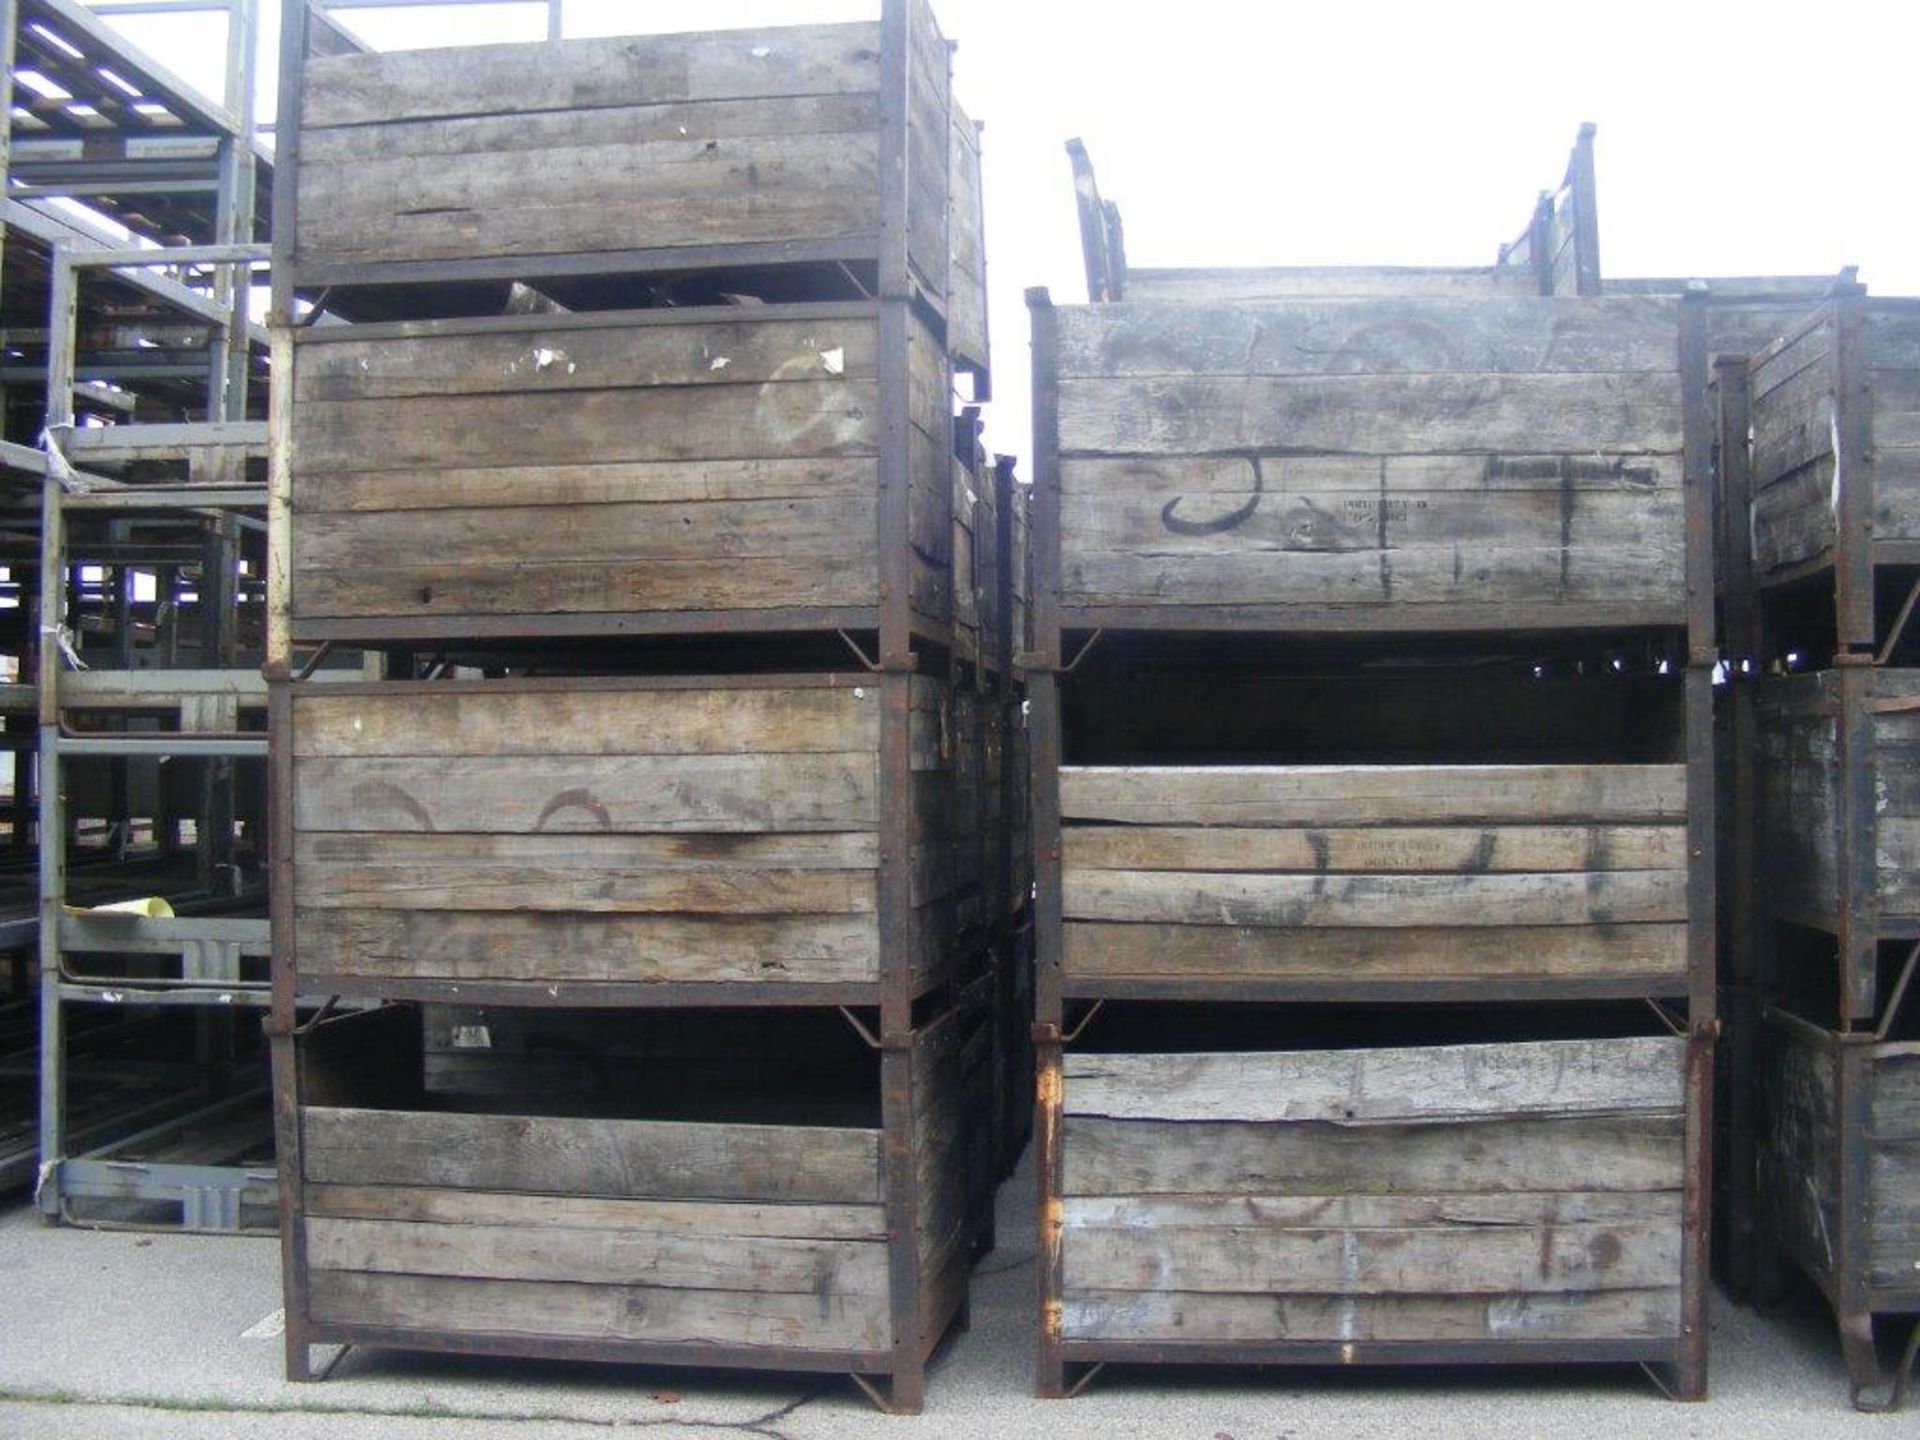 64"L X 33"W X 36"H WOODEN CONTAINER,